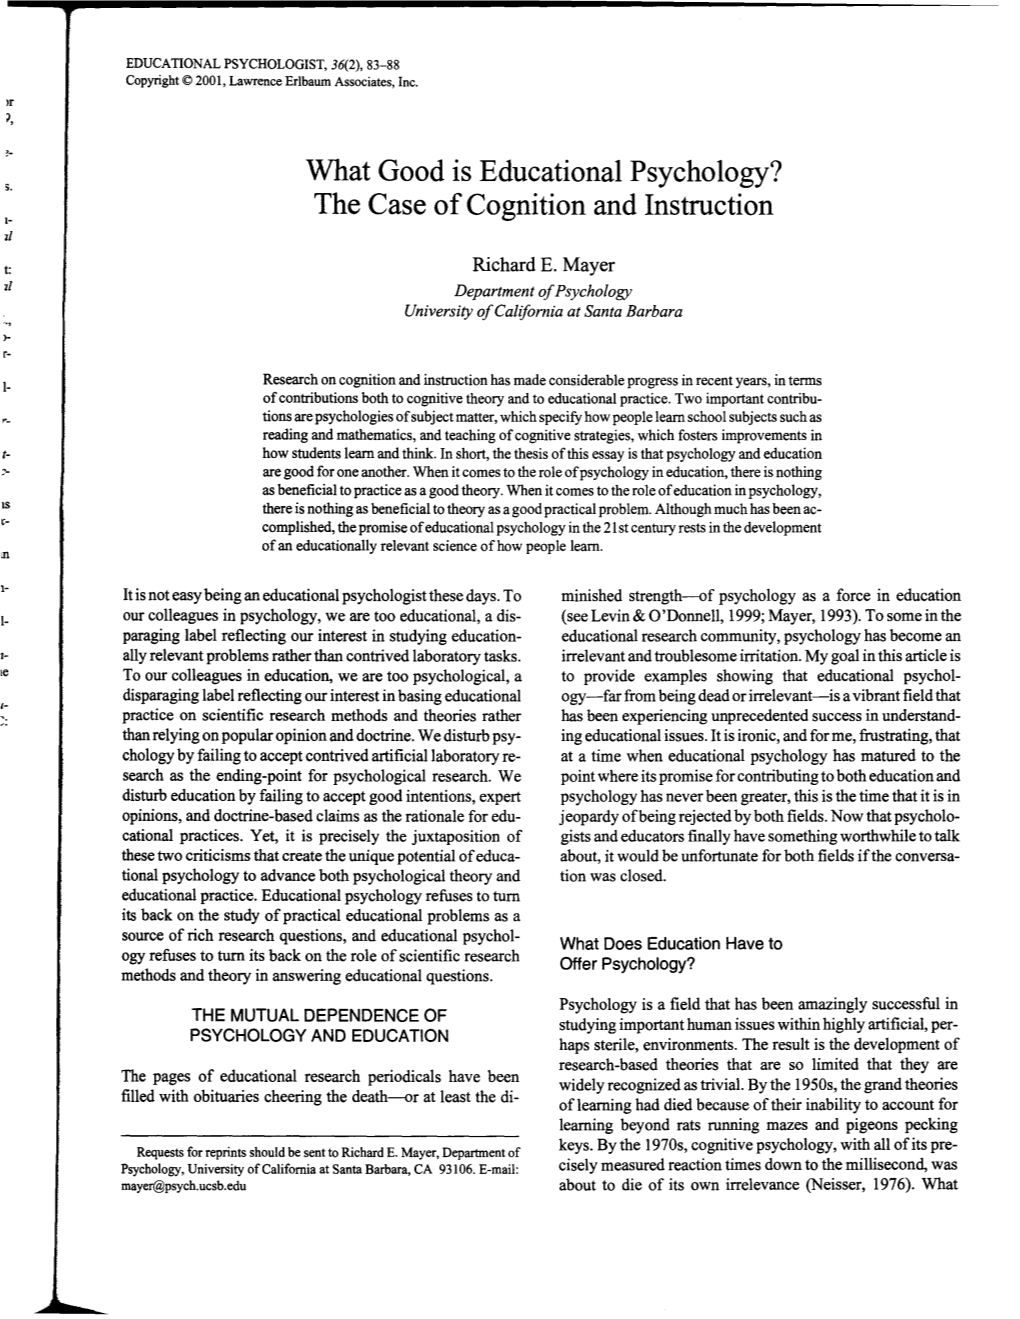 What Good Is Educational Psychology?